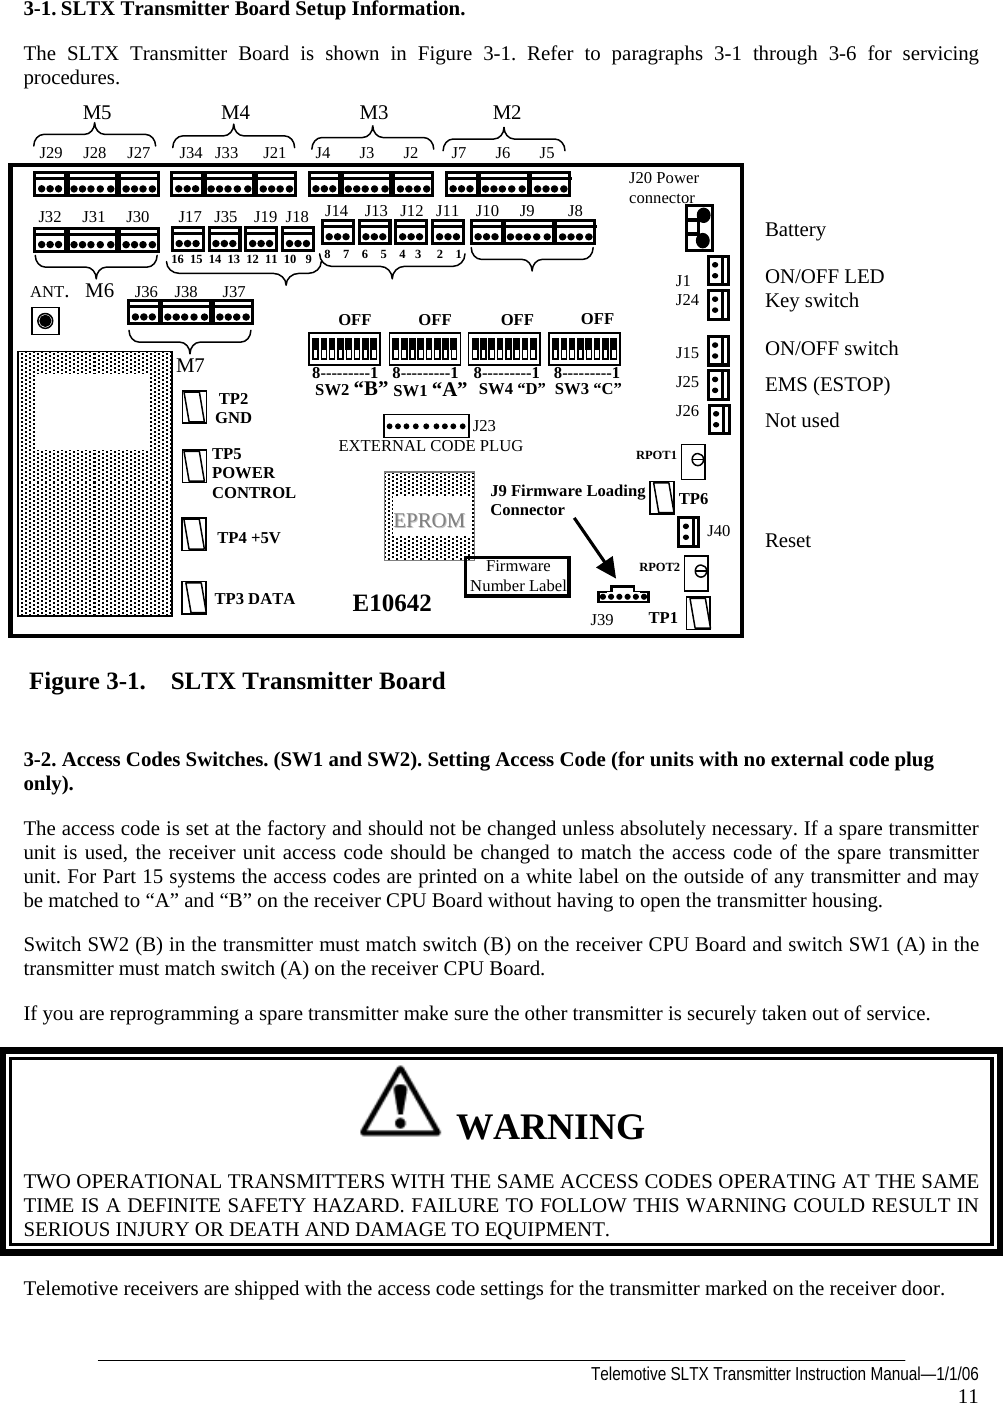  Telemotive SLTX Transmitter Instruction Manual—1/1/06 11    3-1. SLTX Transmitter Board Setup Information. The SLTX Transmitter Board is shown in Figure 3-1. Refer to paragraphs 3-1 through 3-6 for servicing procedures.             3-2. Access Codes Switches. (SW1 and SW2). Setting Access Code (for units with no external code plug only).  The access code is set at the factory and should not be changed unless absolutely necessary. If a spare transmitter unit is used, the receiver unit access code should be changed to match the access code of the spare transmitter unit. For Part 15 systems the access codes are printed on a white label on the outside of any transmitter and may be matched to “A” and “B” on the receiver CPU Board without having to open the transmitter housing.  Switch SW2 (B) in the transmitter must match switch (B) on the receiver CPU Board and switch SW1 (A) in the transmitter must match switch (A) on the receiver CPU Board. If you are reprogramming a spare transmitter make sure the other transmitter is securely taken out of service.    WARNING TWO OPERATIONAL TRANSMITTERS WITH THE SAME ACCESS CODES OPERATING AT THE SAME TIME IS A DEFINITE SAFETY HAZARD. FAILURE TO FOLLOW THIS WARNING COULD RESULT IN SERIOUS INJURY OR DEATH AND DAMAGE TO EQUIPMENT. Telemotive receivers are shipped with the access code settings for the transmitter marked on the receiver door.  Figure 3-1. SLTX Transmitter Board TP2 GND TP1 TP3 DATA RPOT2 OFF 8---------1 SW1 “A” OFF 8---------1 SW2 “B” OFF 8---------1  SW3 “C” E10642  EEPPRROOMMTP4 +5V J9 Firmware Loading Connector Firmware  Number Label OFF 8---------1  SW4 “D” TP5 POWER CONTROL  TP6 J29 J28 J27 J34 J33 J21 J4 J3 J2 J7 J6 J5J32     J31     J30       J17   J35    J19  J18   J14    J13   J12   J11    J10     J9        J8      ANT.   M6     J36    J38      J37         J20 Power connector J1 J24 J15 J25 J26J40 J39RPOT1 J23       M5                     M4                     M3                    M2  16  15  14  13  12  11  10   9  8    7    6    5    4   3     2    1 M7 EXTERNAL CODE PLUG Battery  ON/OFF LED Key switch  ON/OFF switch  EMS (ESTOP)  Not used     Reset 